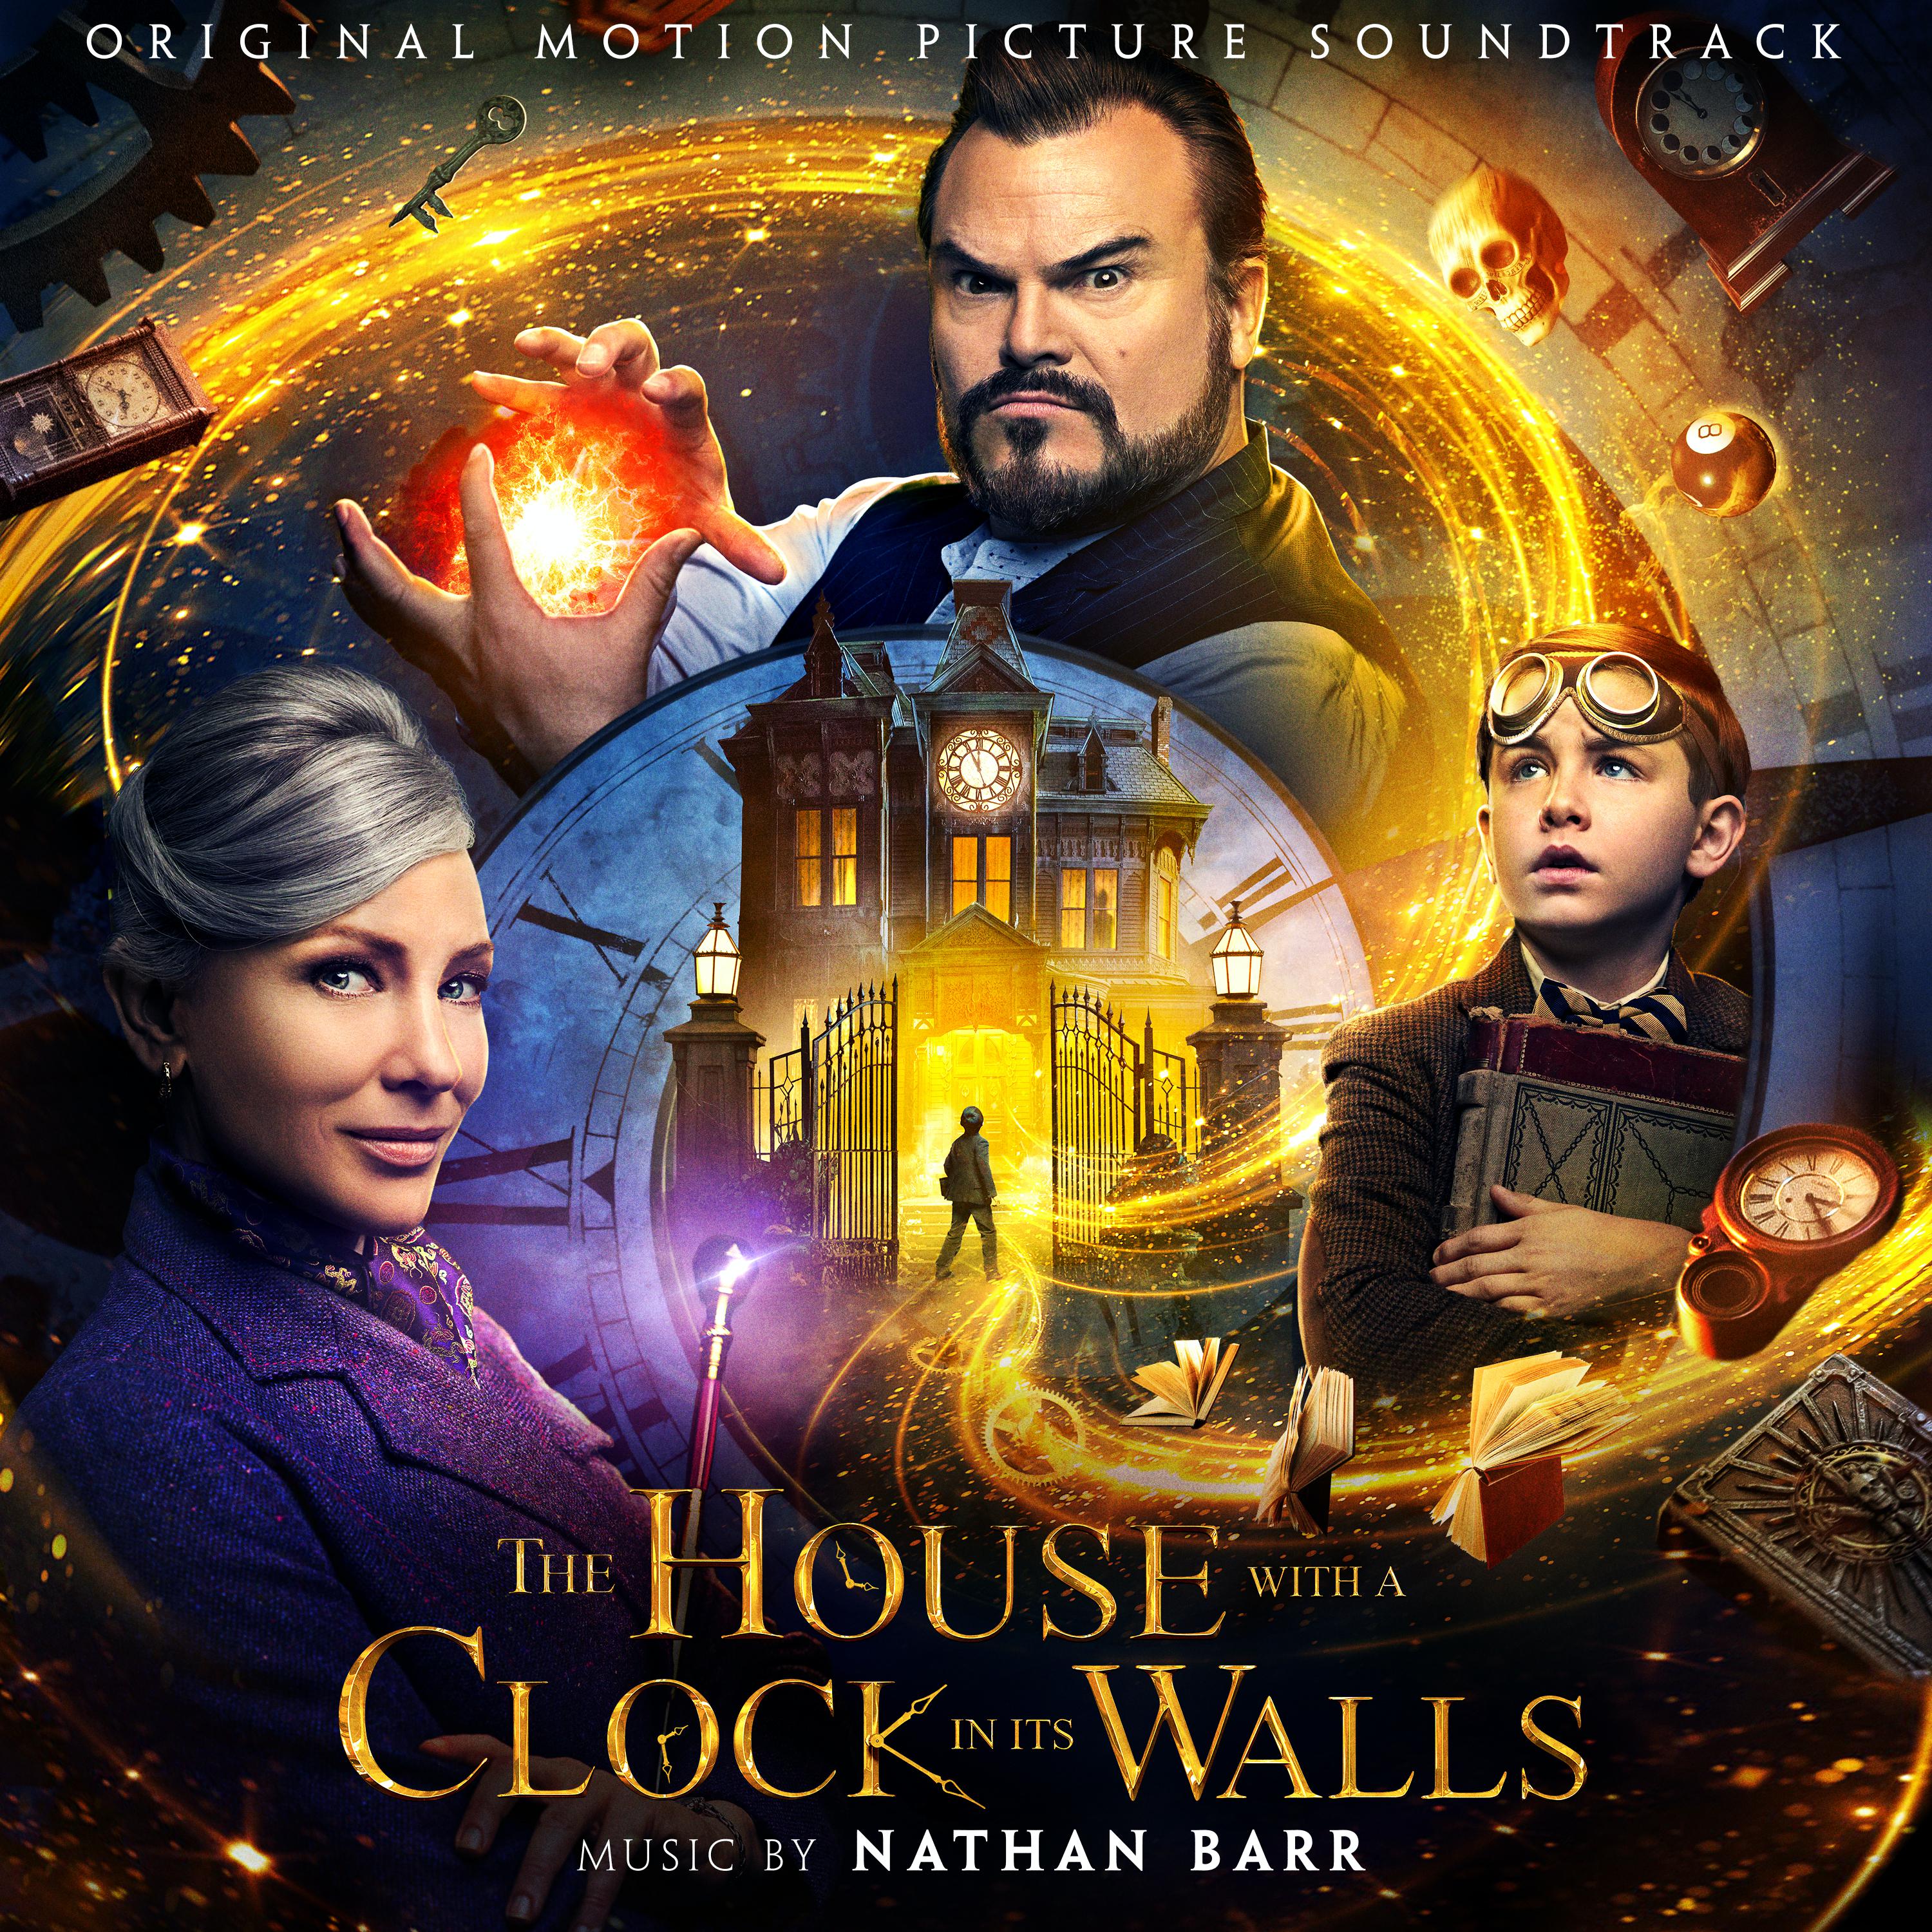 The House With a Clock In Its Walls (Original Motion Picture Soundtrack)